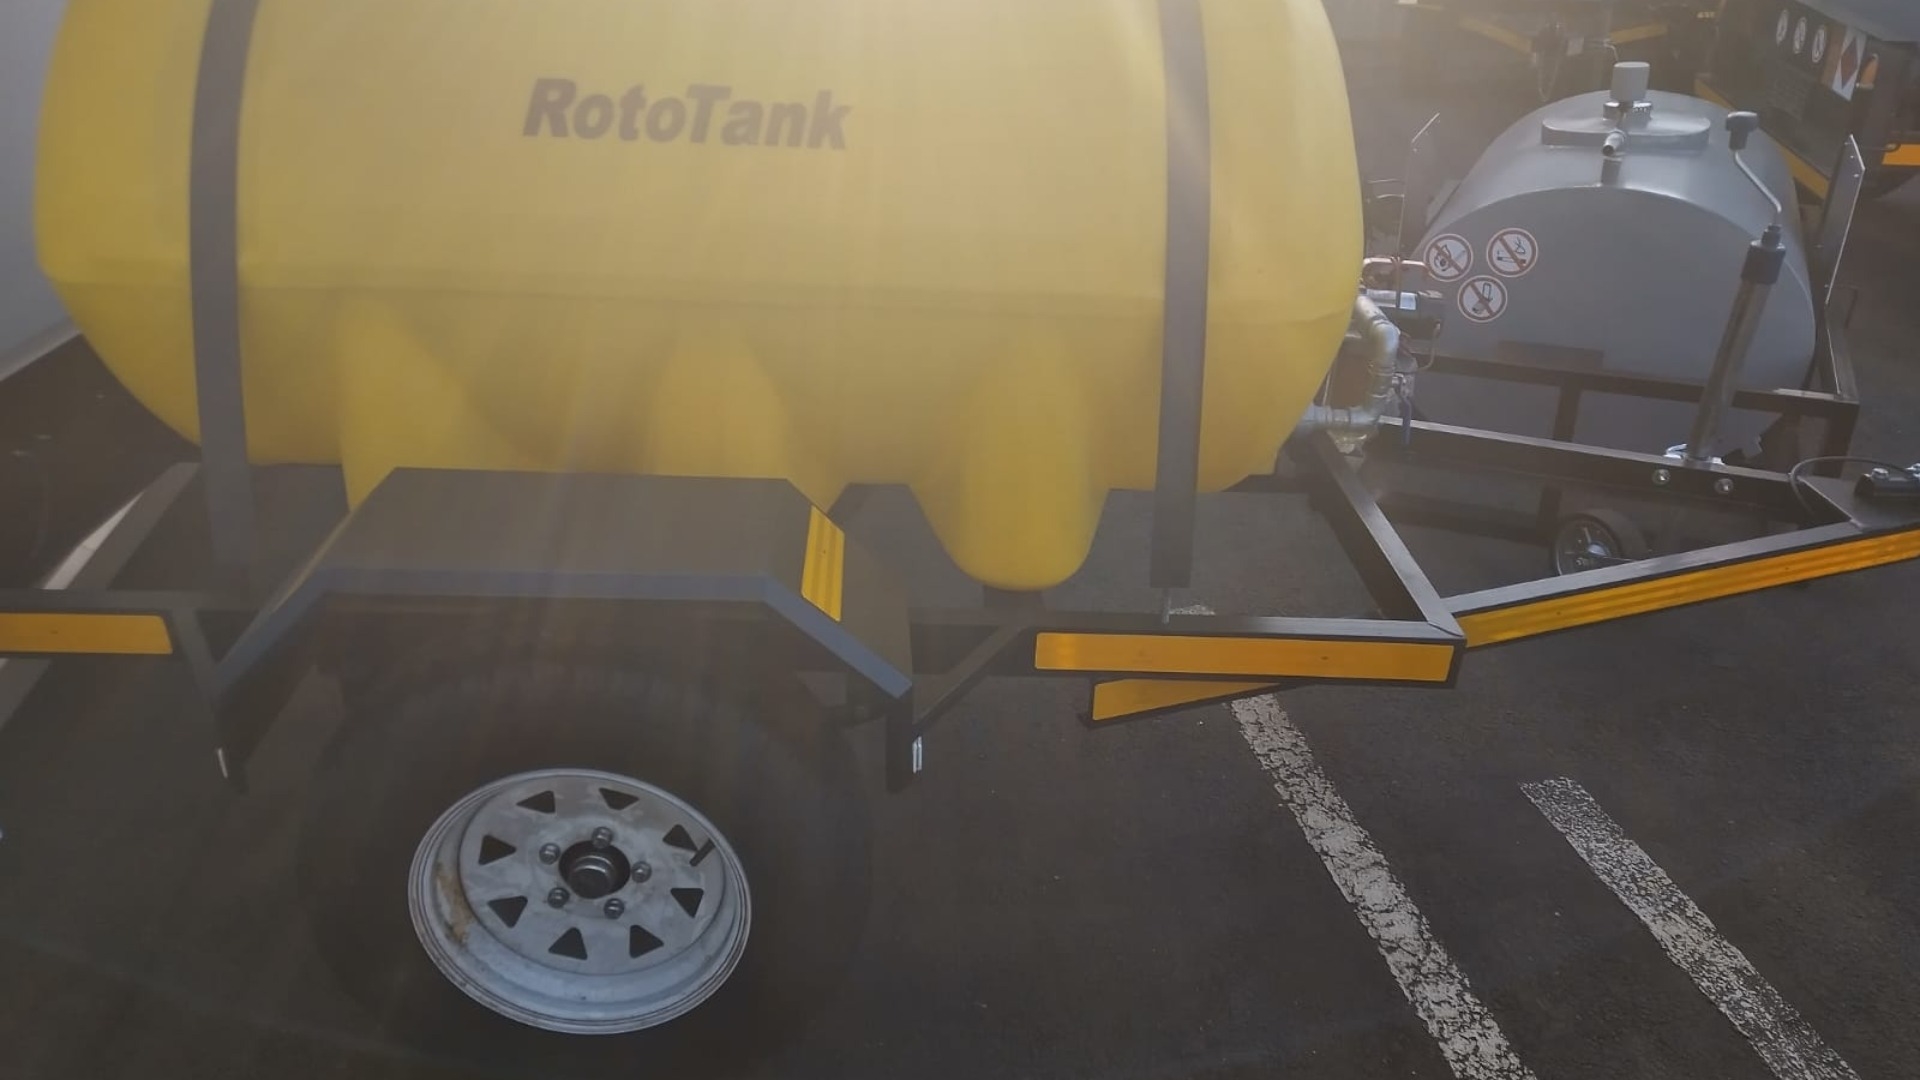 Custom Diesel bowser trailer 1000 Litre Plastic Diesel Bowser KZN 2022 for sale by Jikelele Tankers and Trailers   | Truck & Trailer Marketplaces